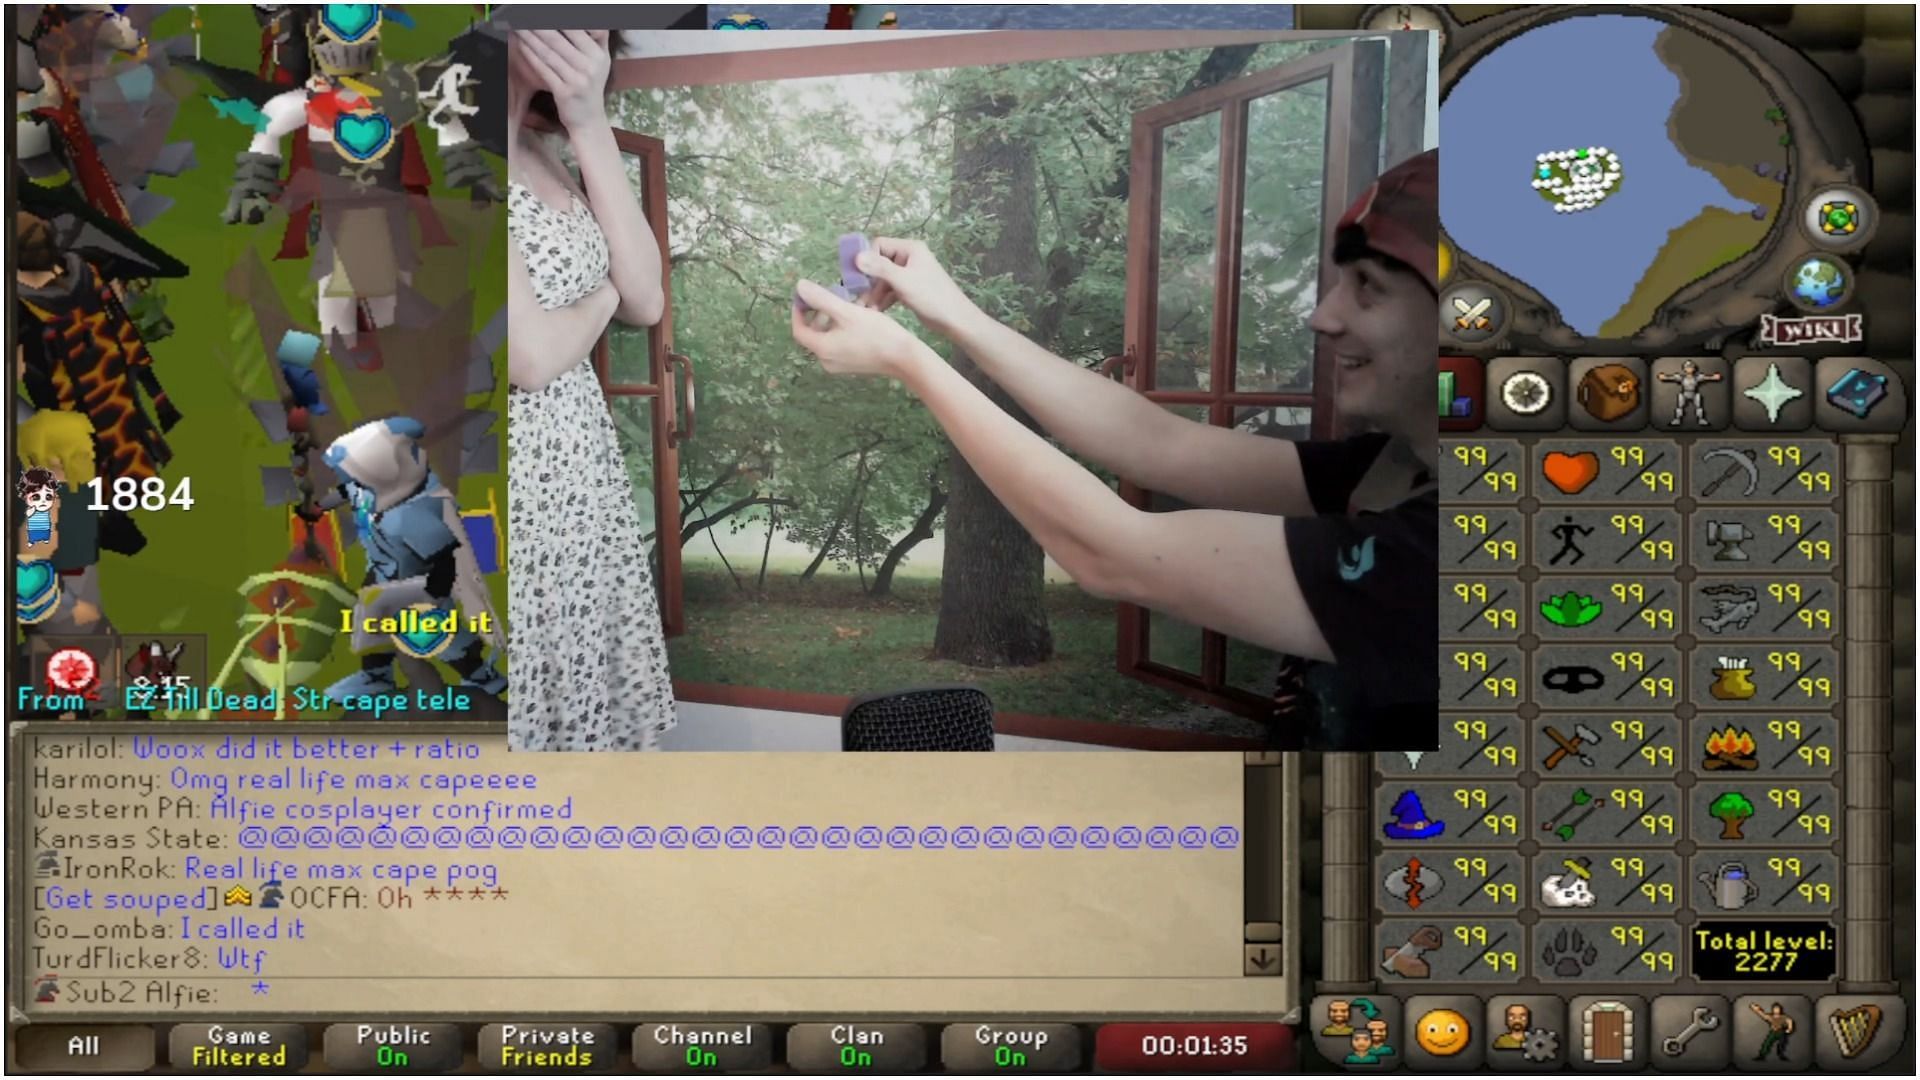 Old School RuneScape streamer Alfie proposed to his girlfriend (Image via Twitch)